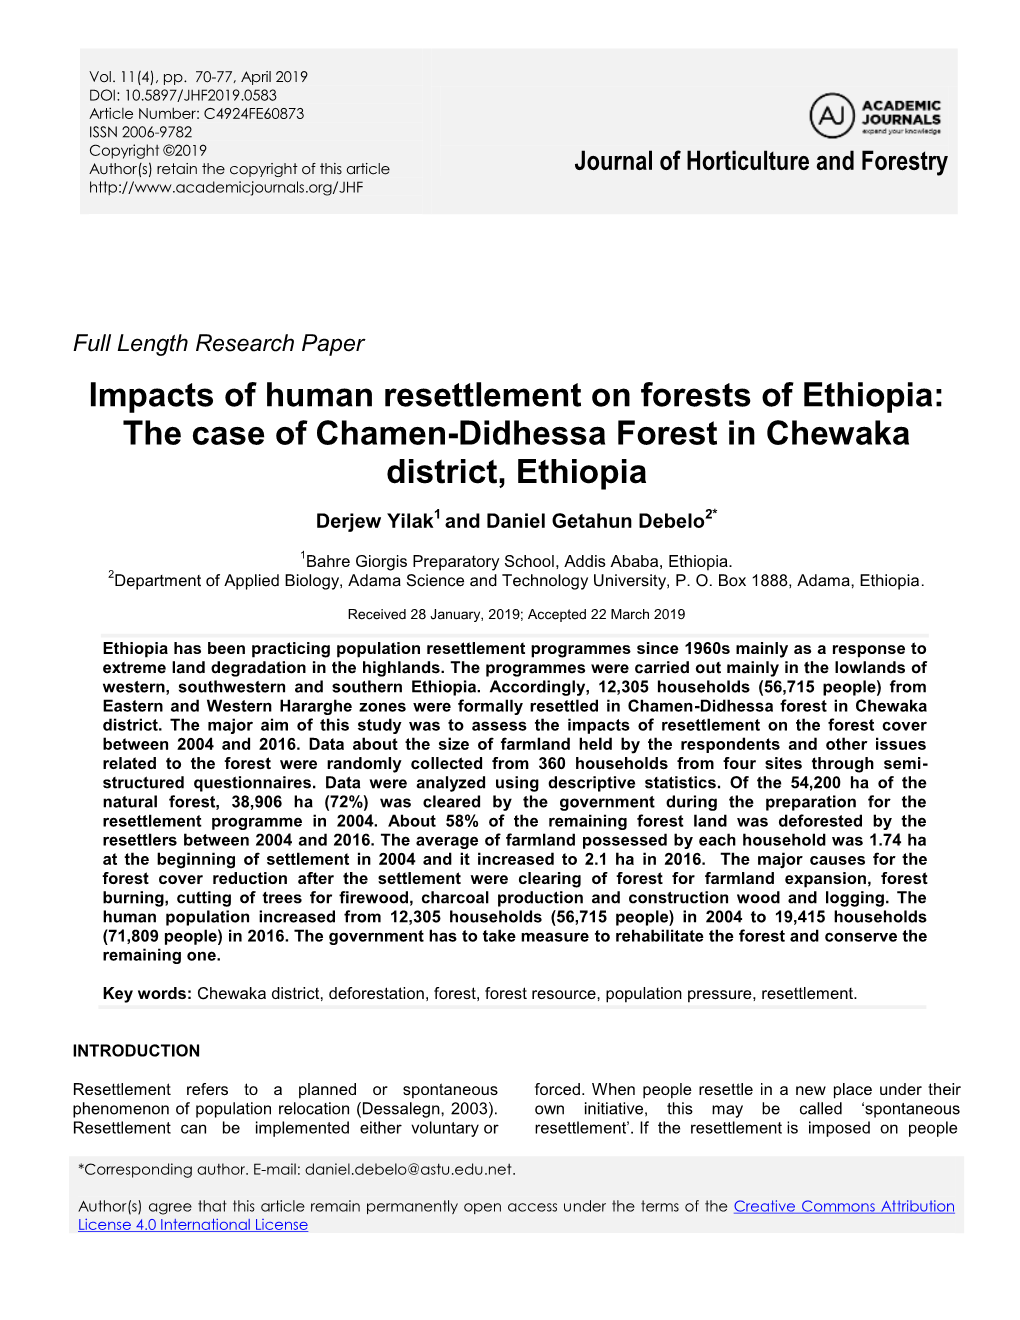 Impacts of Human Resettlement on Forests of Ethiopia: the Case of Chamen-Didhessa Forest in Chewaka District, Ethiopia